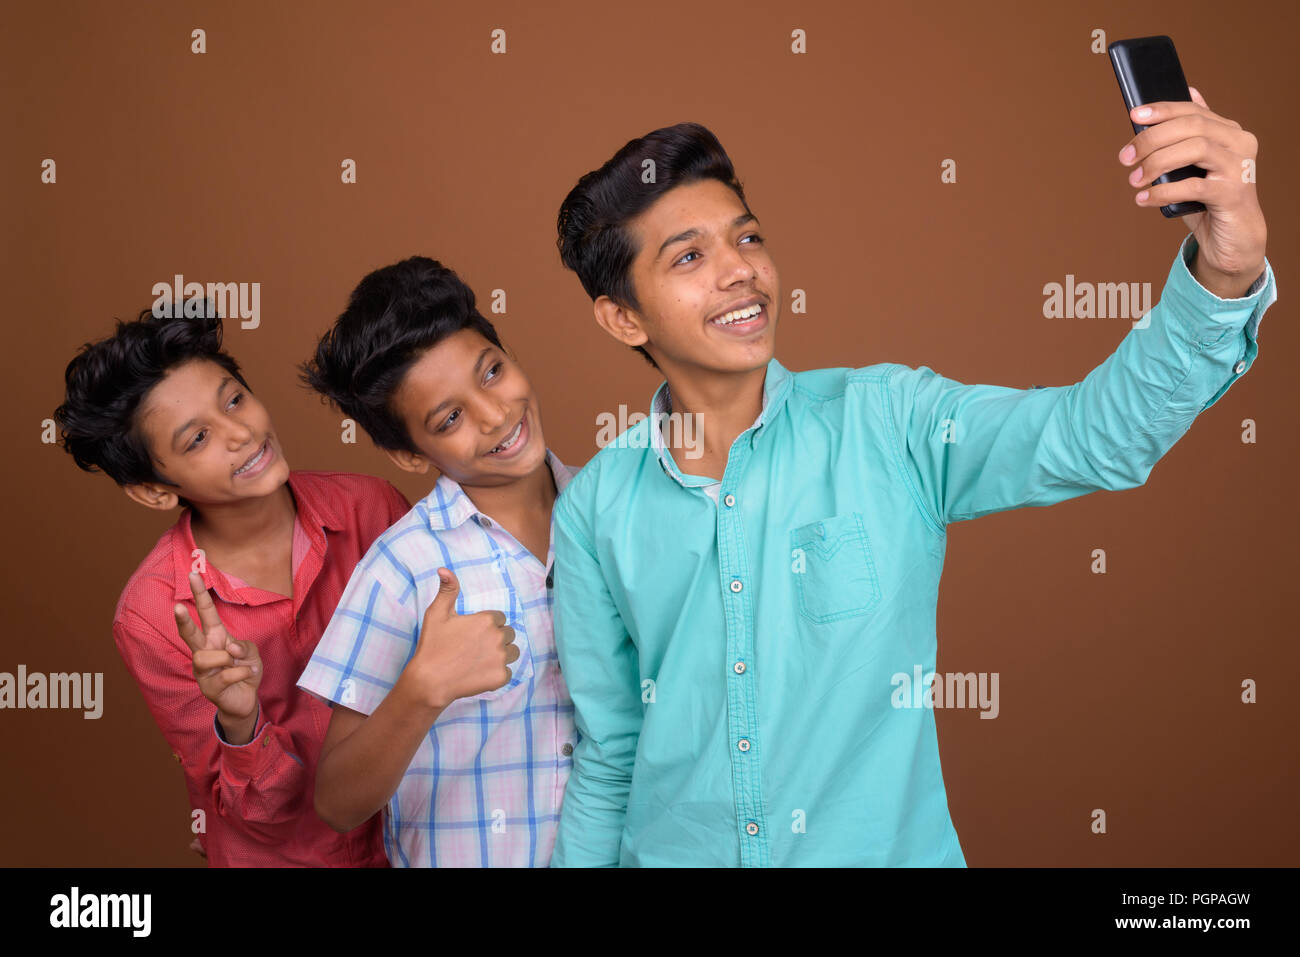 Three young Indian brothers together against brown background Stock Photo